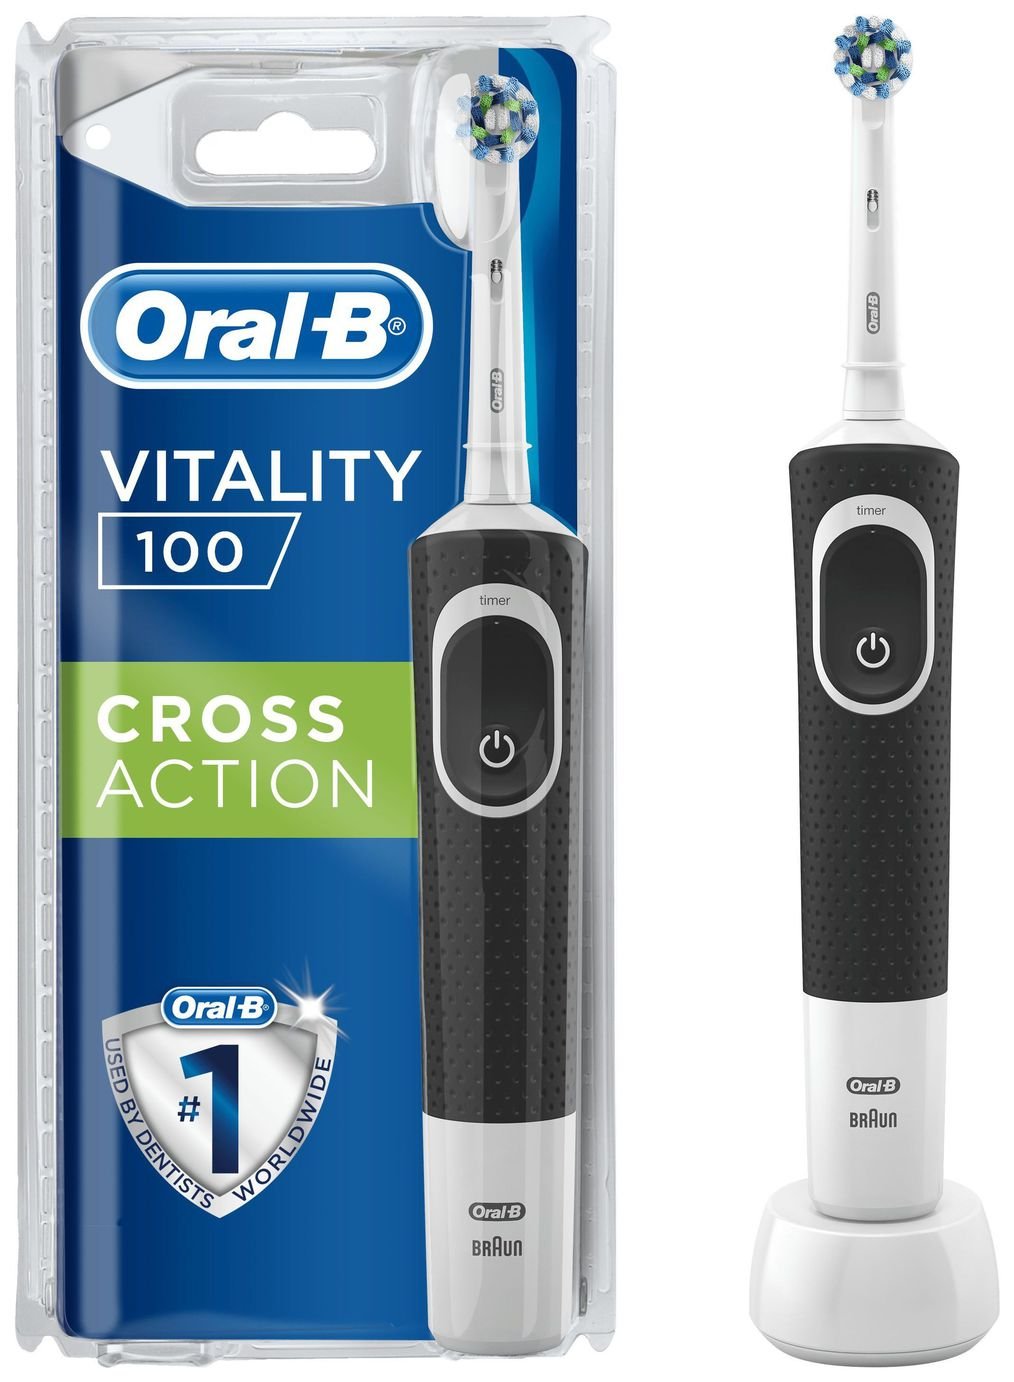 Oral B Vitality Precision Clean Electric Toothbrush Reviews